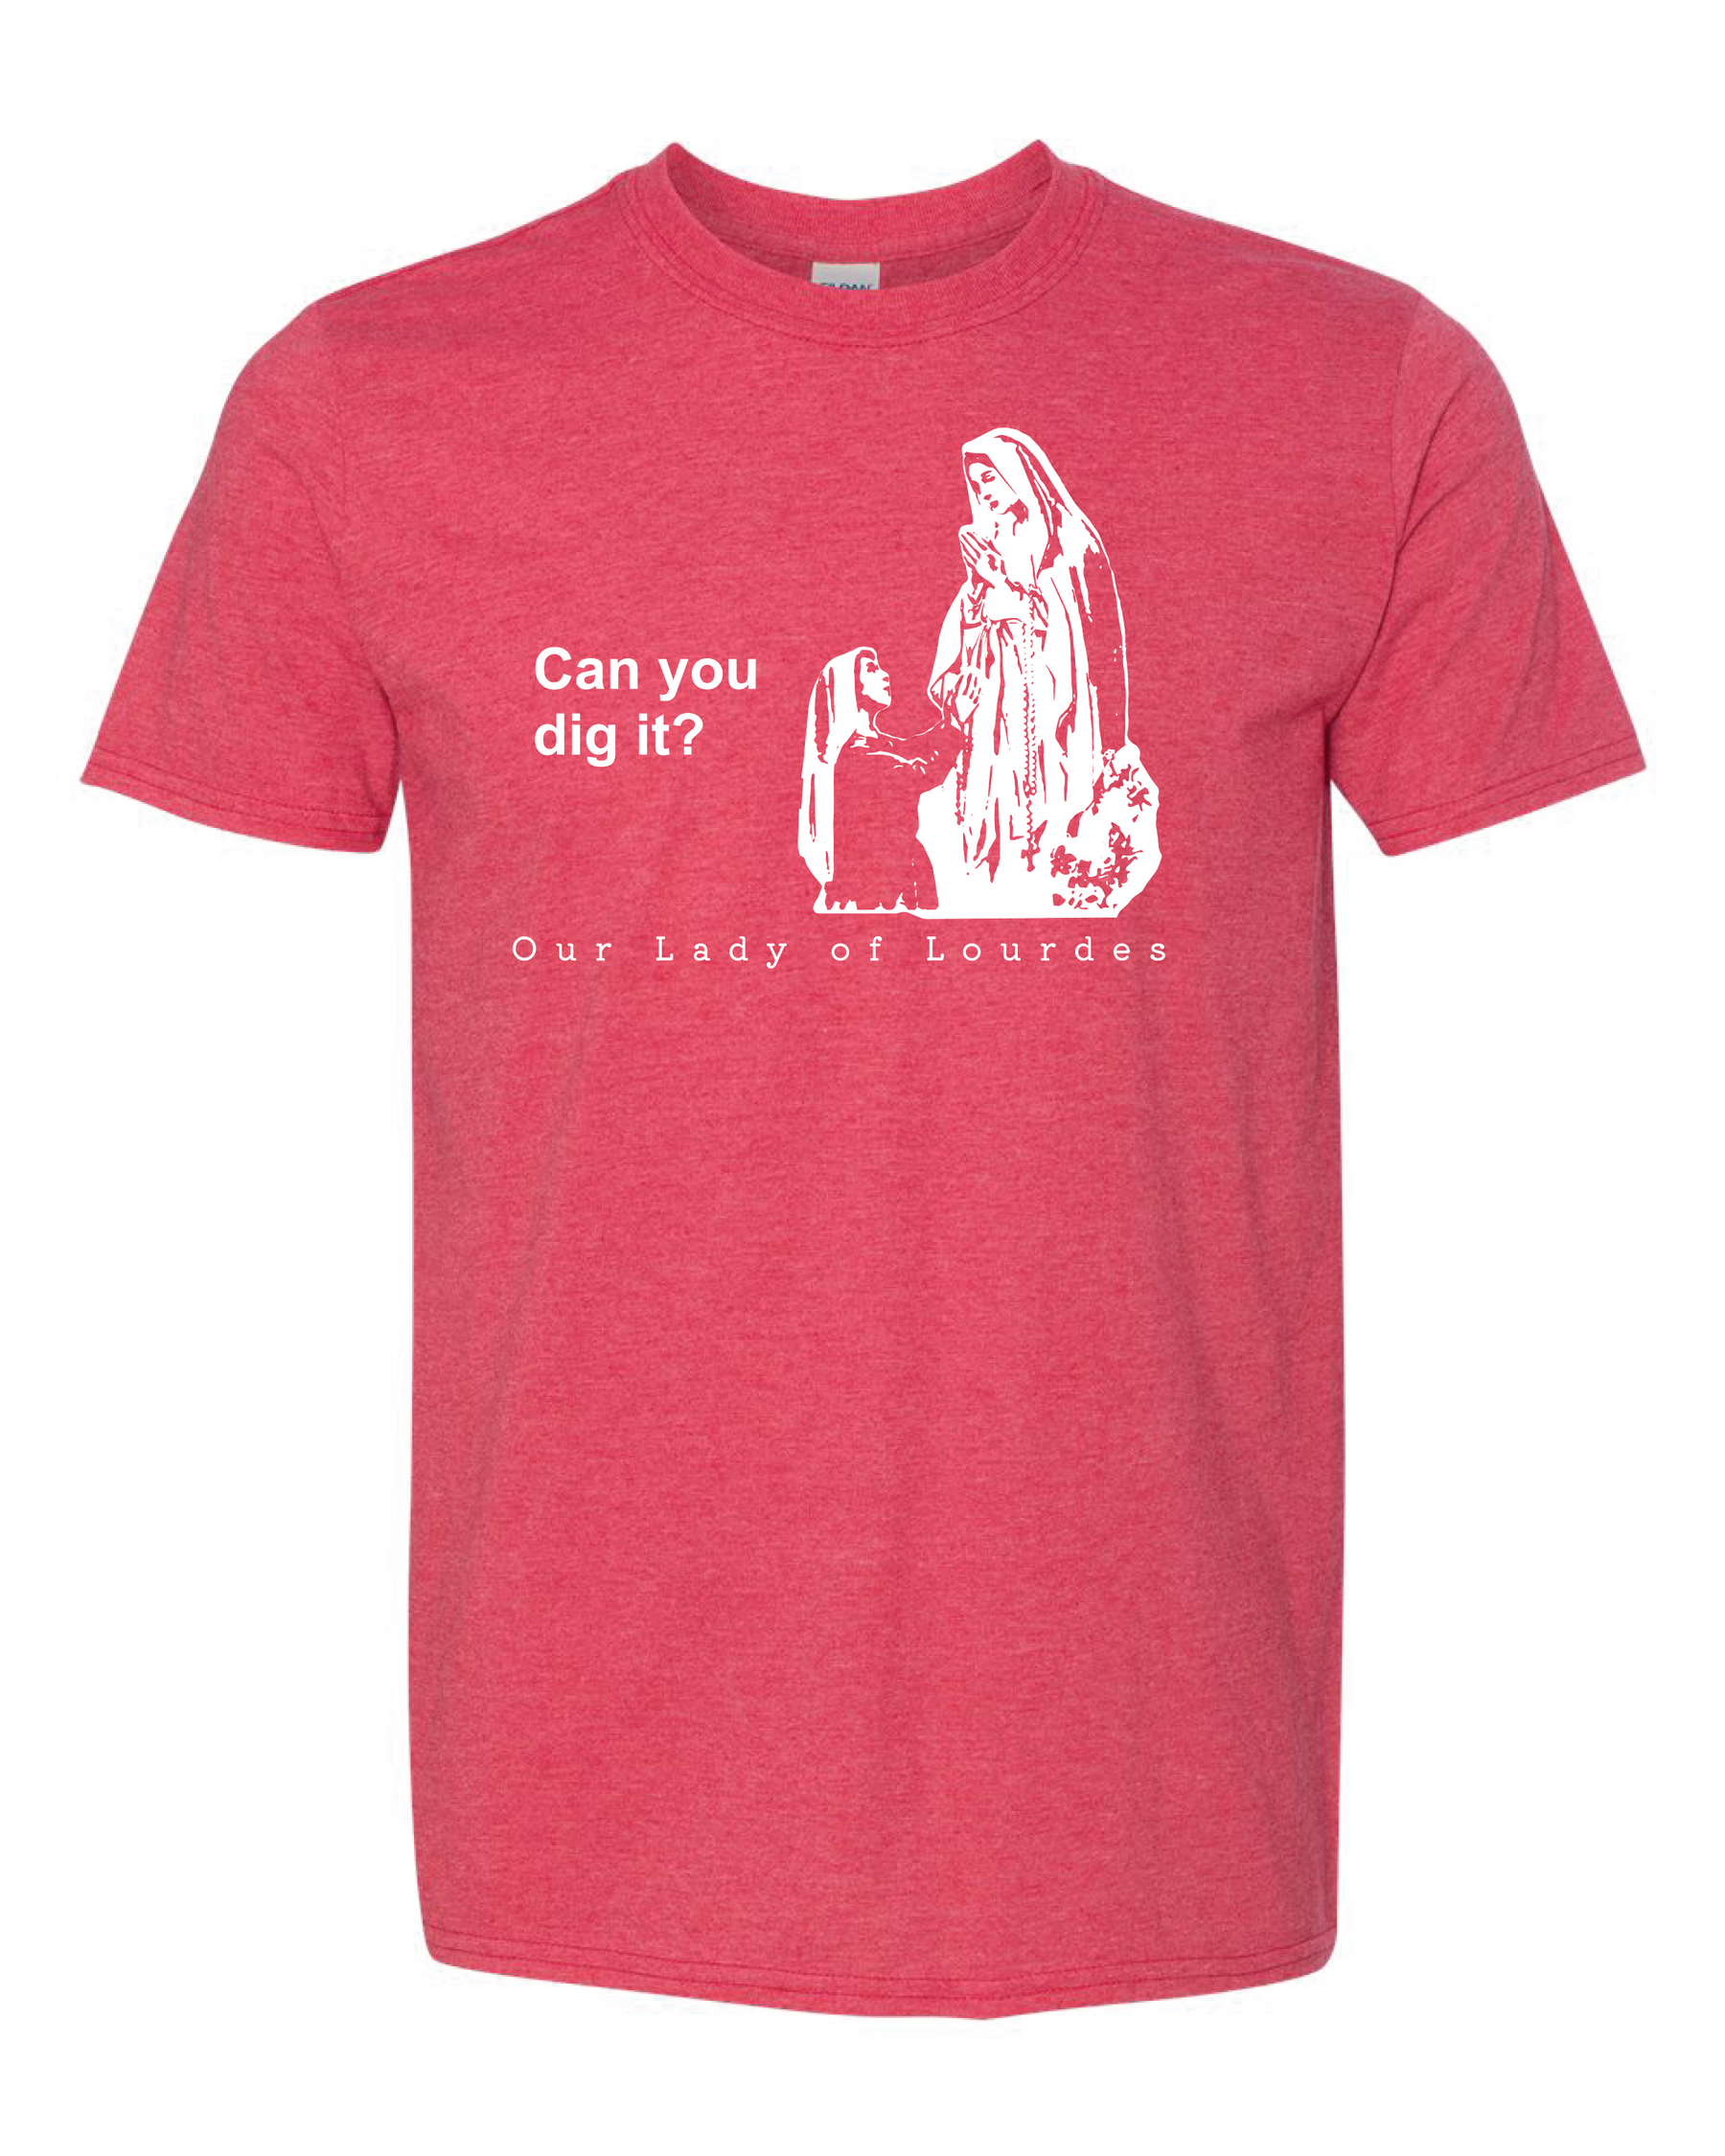 Can you dig it? - Our Lady of Lourdes T Shirt